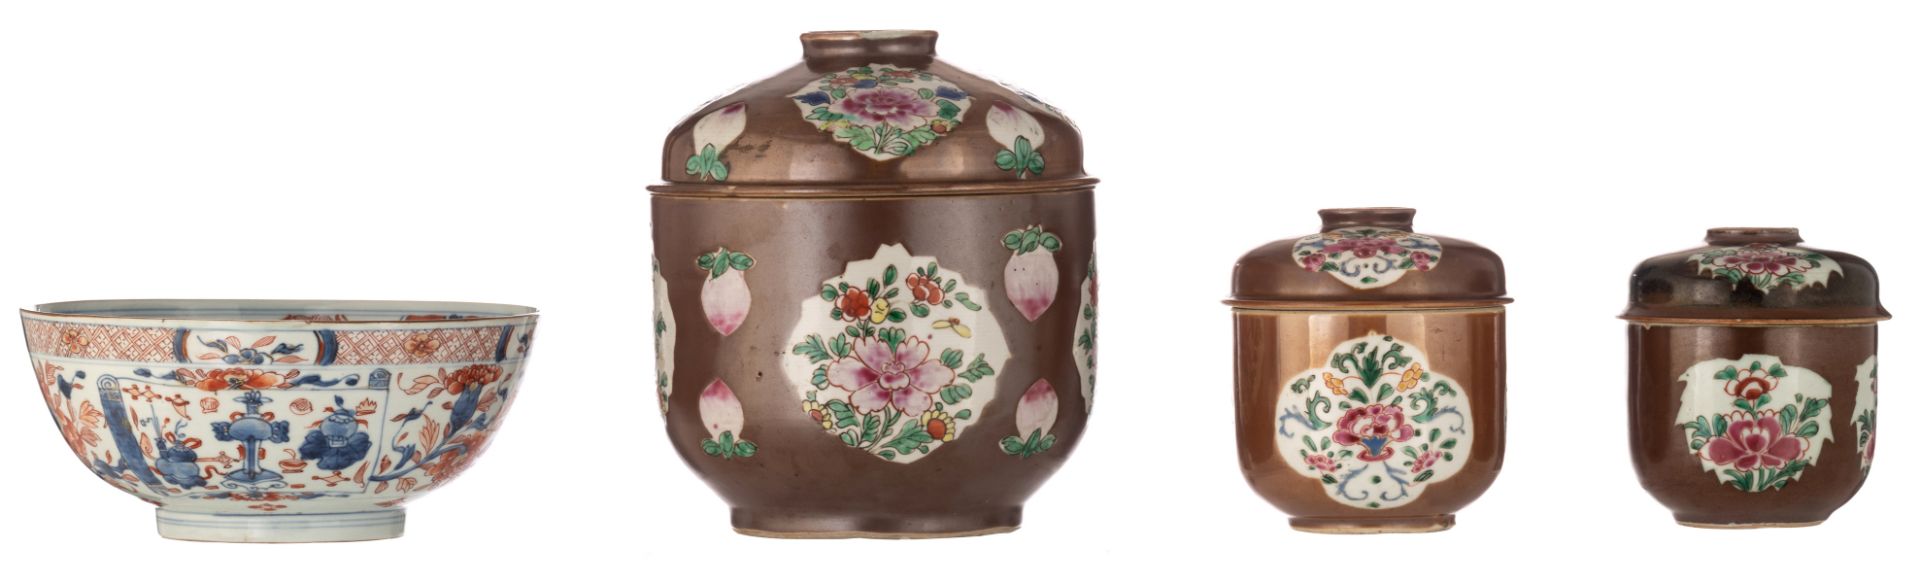 Three Chinese café au lait and famille rose ginger jars and covers, decorated with fruits and flower